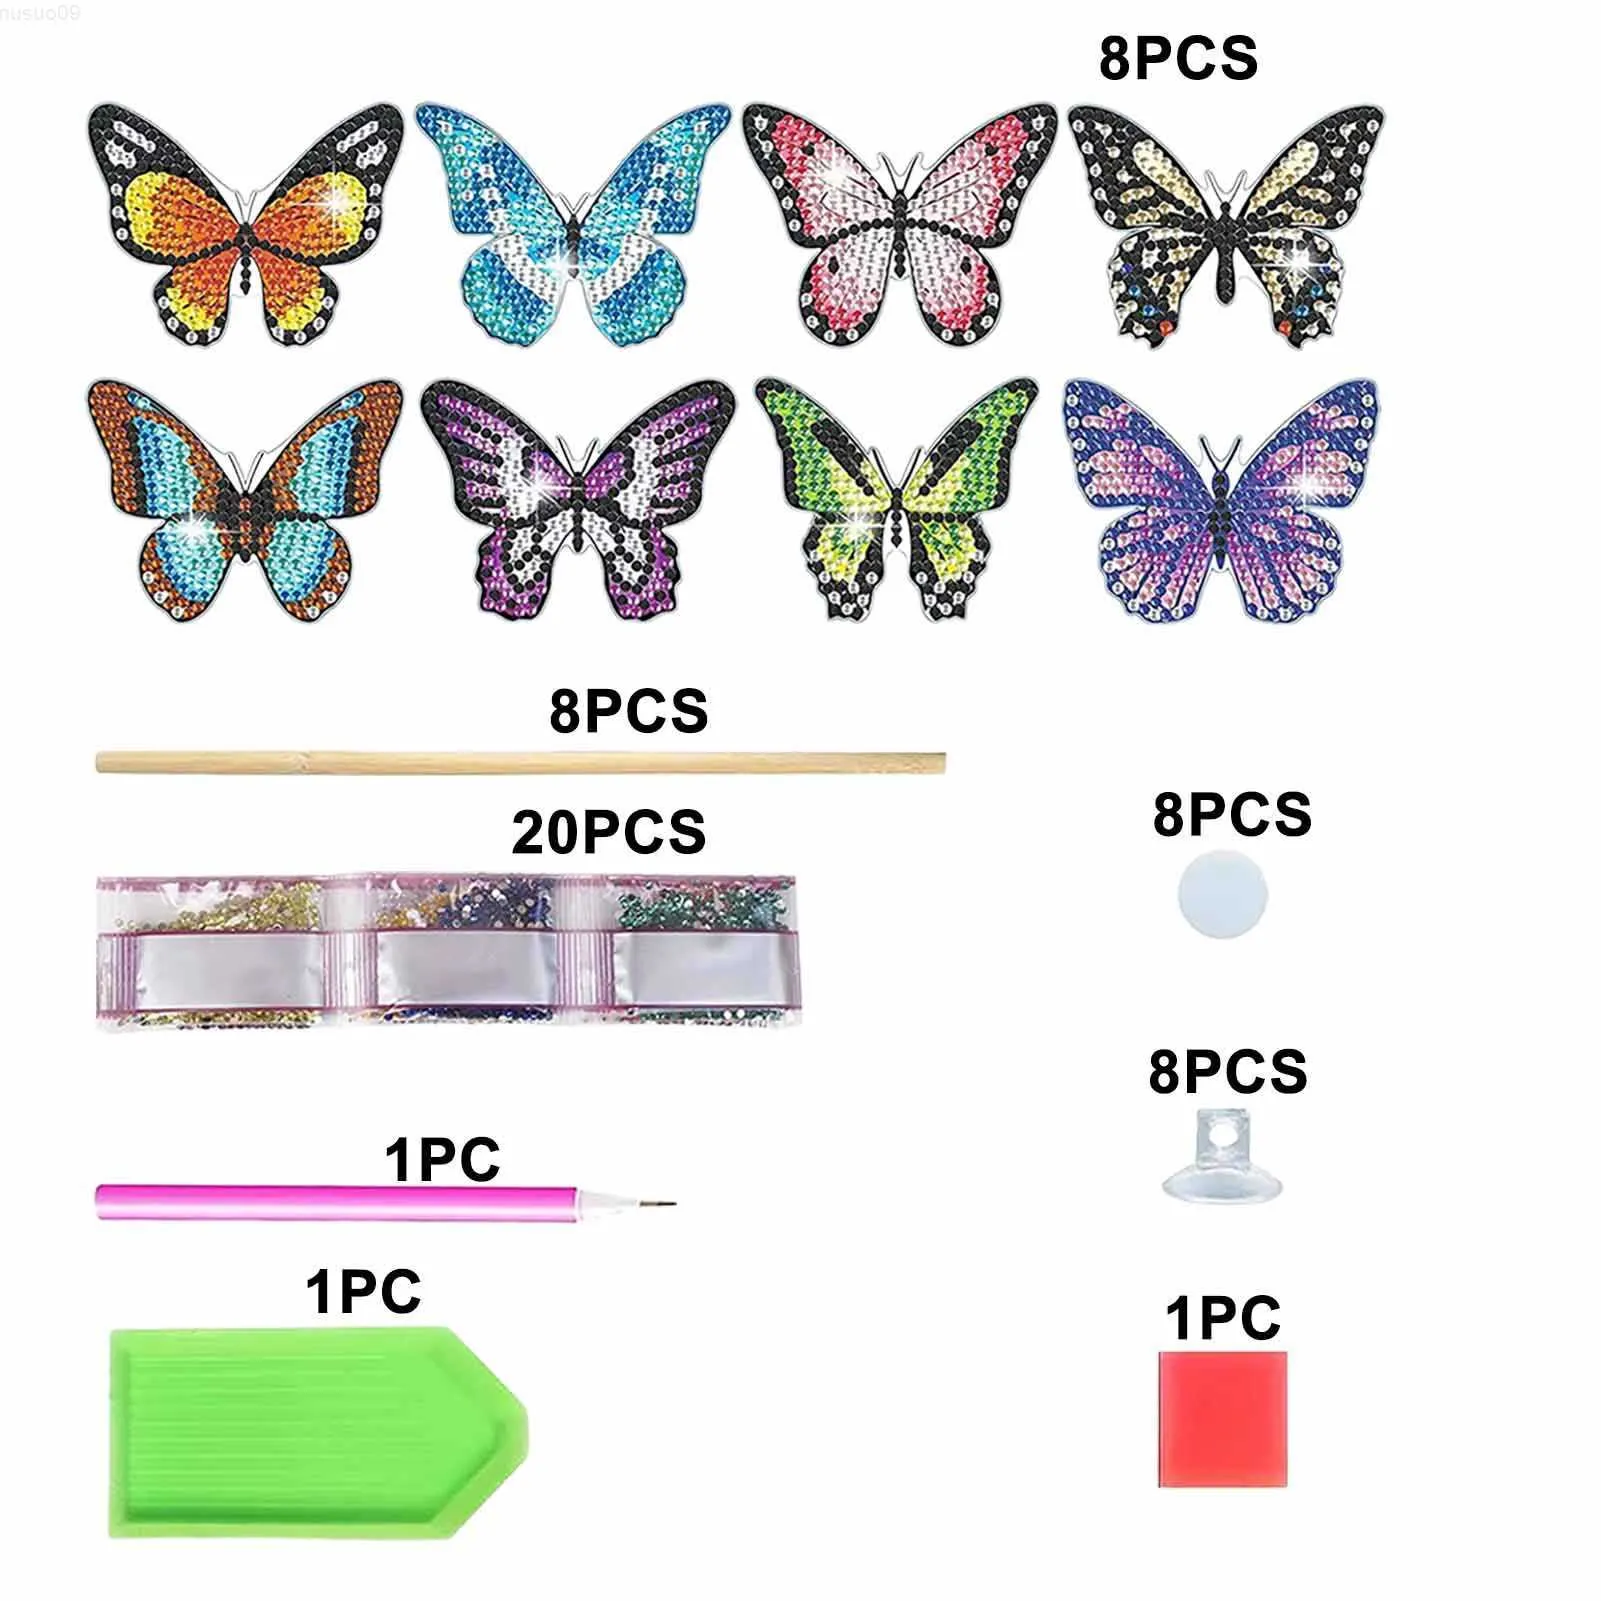 Garden Decorations 8pcs Adult Butterfly Diamond Art Lifelike Delicate Garden Decor Compact For Crafts Acrylic Easy To Install Handmade Gift Novelty L230714